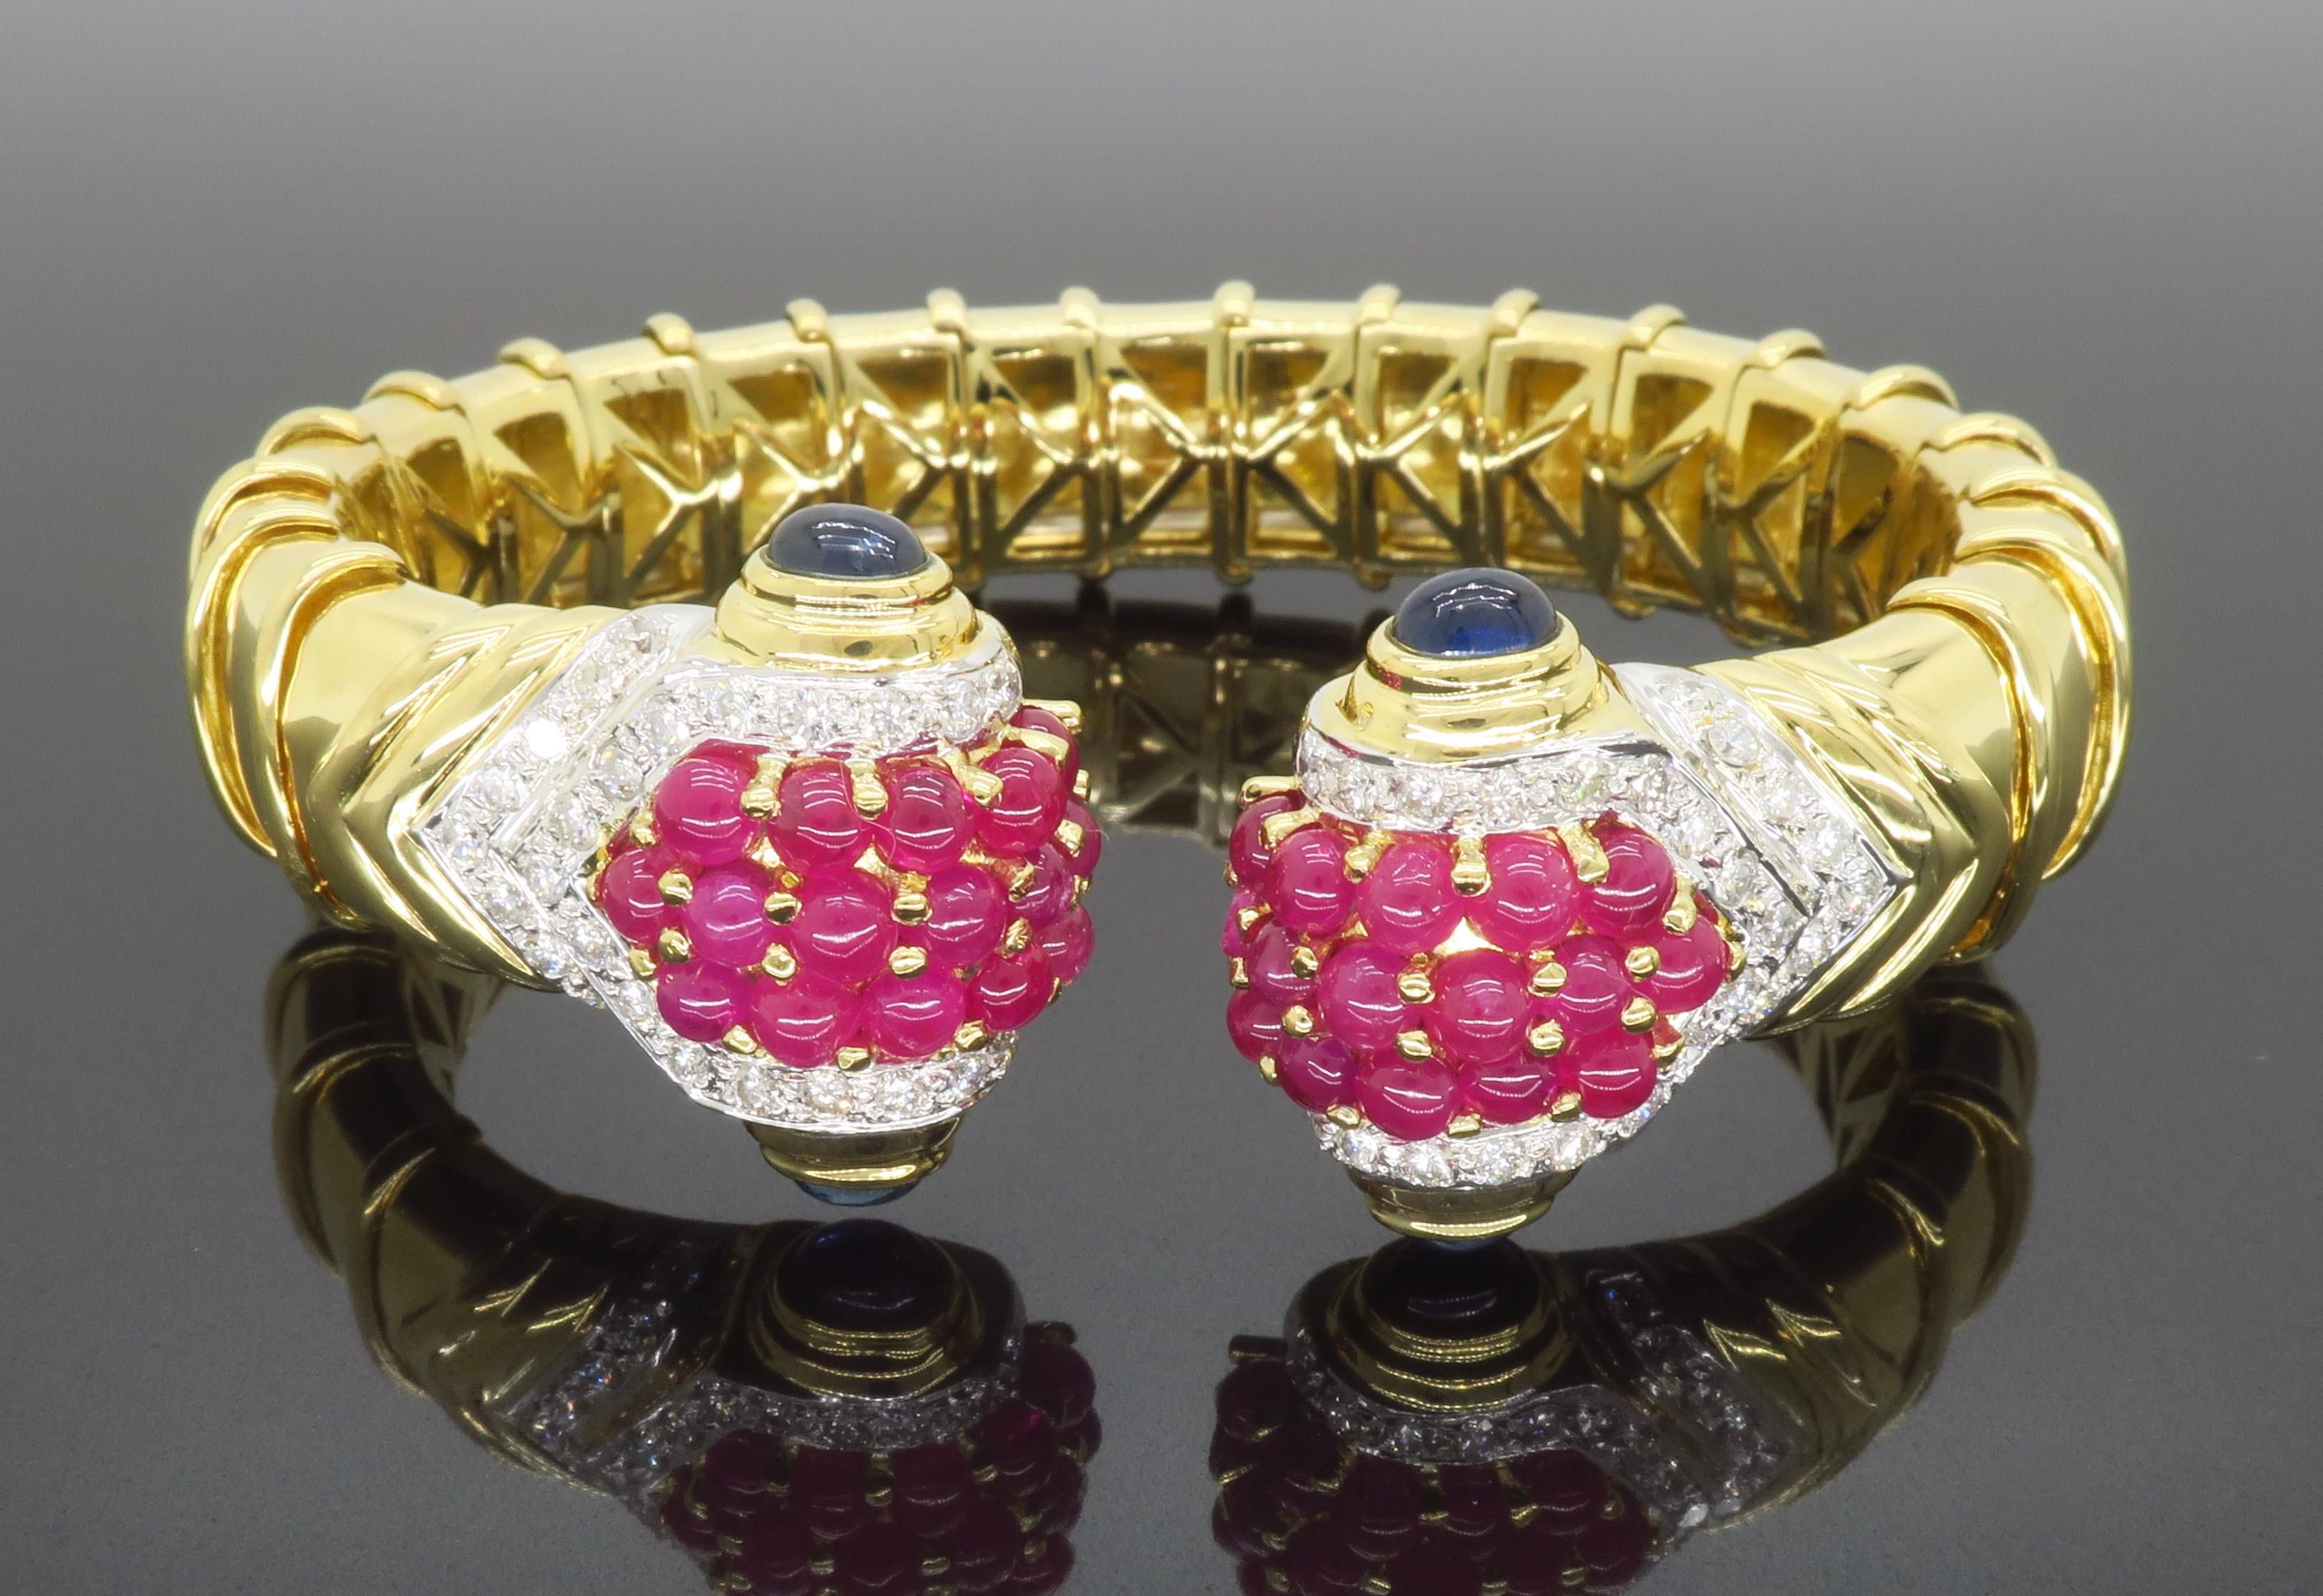 Stunning Diamond, Cabochon Ruby, and Cabochon Sapphire flex cuff bracelet crafted in 18k yellow gold. 

Gemstone: Diamond, Ruby, & Sapphire
Diamond Carat Weight: Approximately 1.50CTW
Diamond Cut: Round Brilliant Cut
Average Diamond Color: